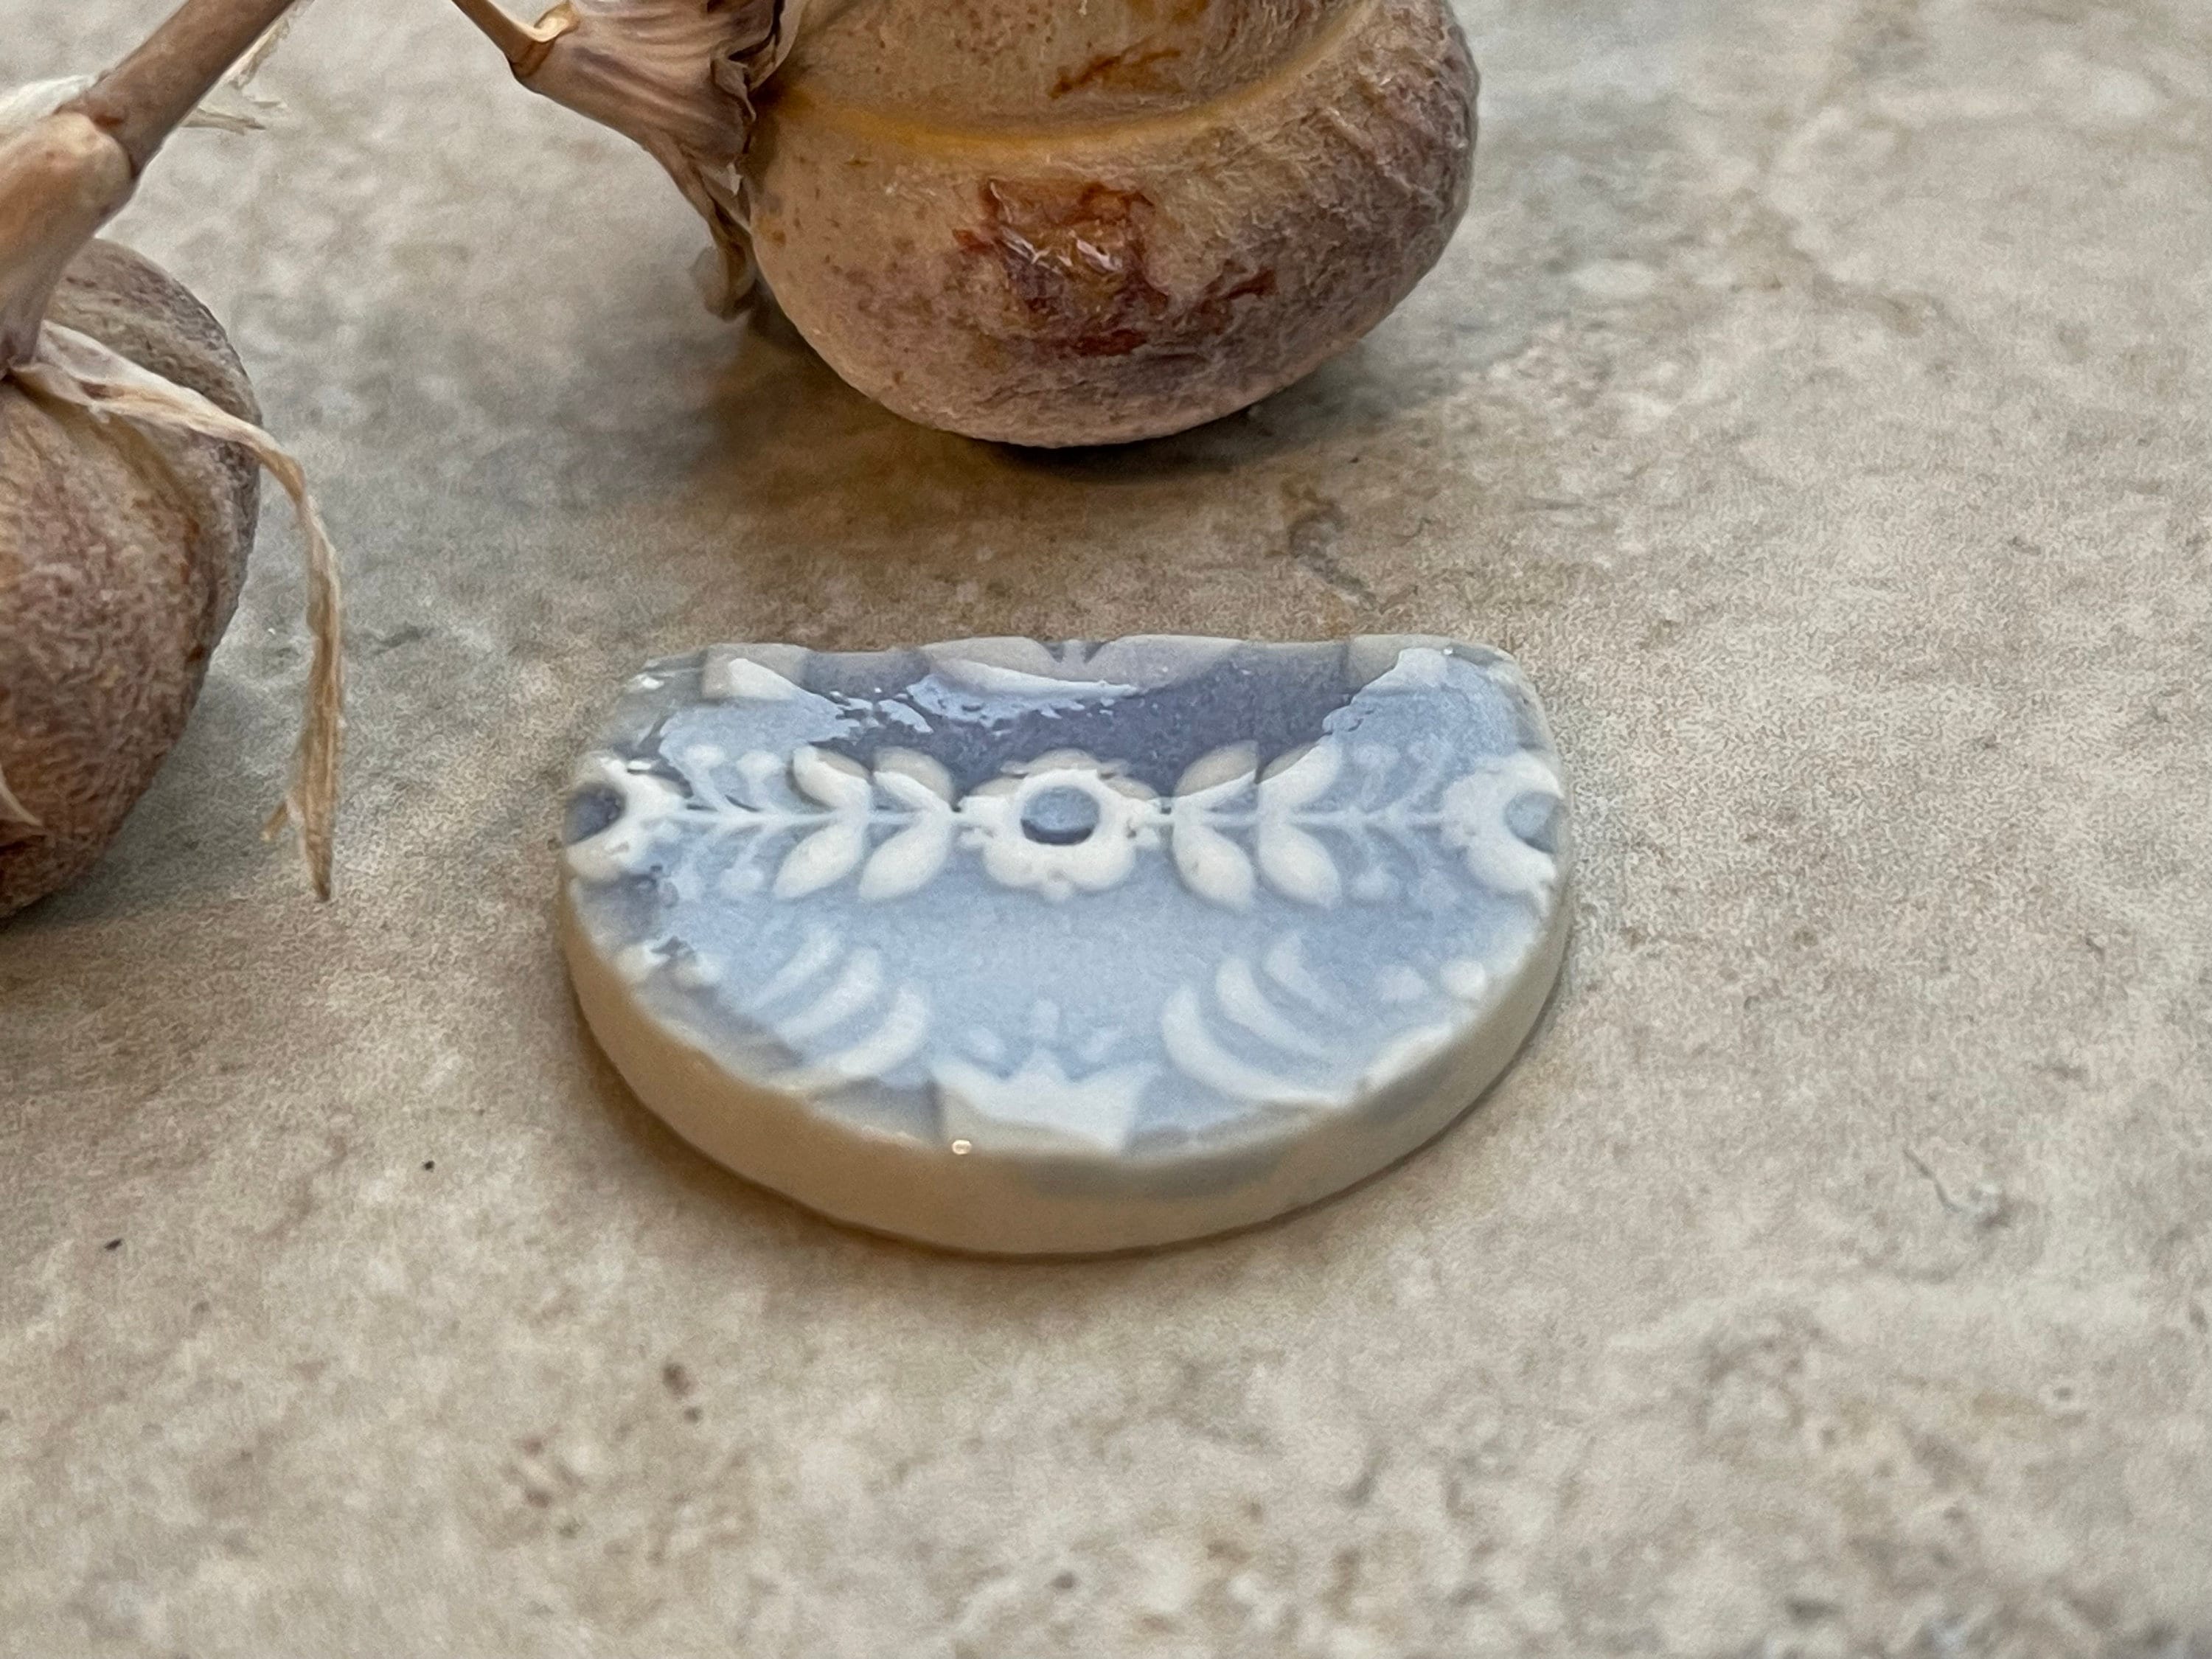 Metalsmithing Cabochon, Blue Heart Pattern Pendant Bead, Porcelain Cab, Ceramic Charms, Jewelry Making Components, Half Circle Pendant